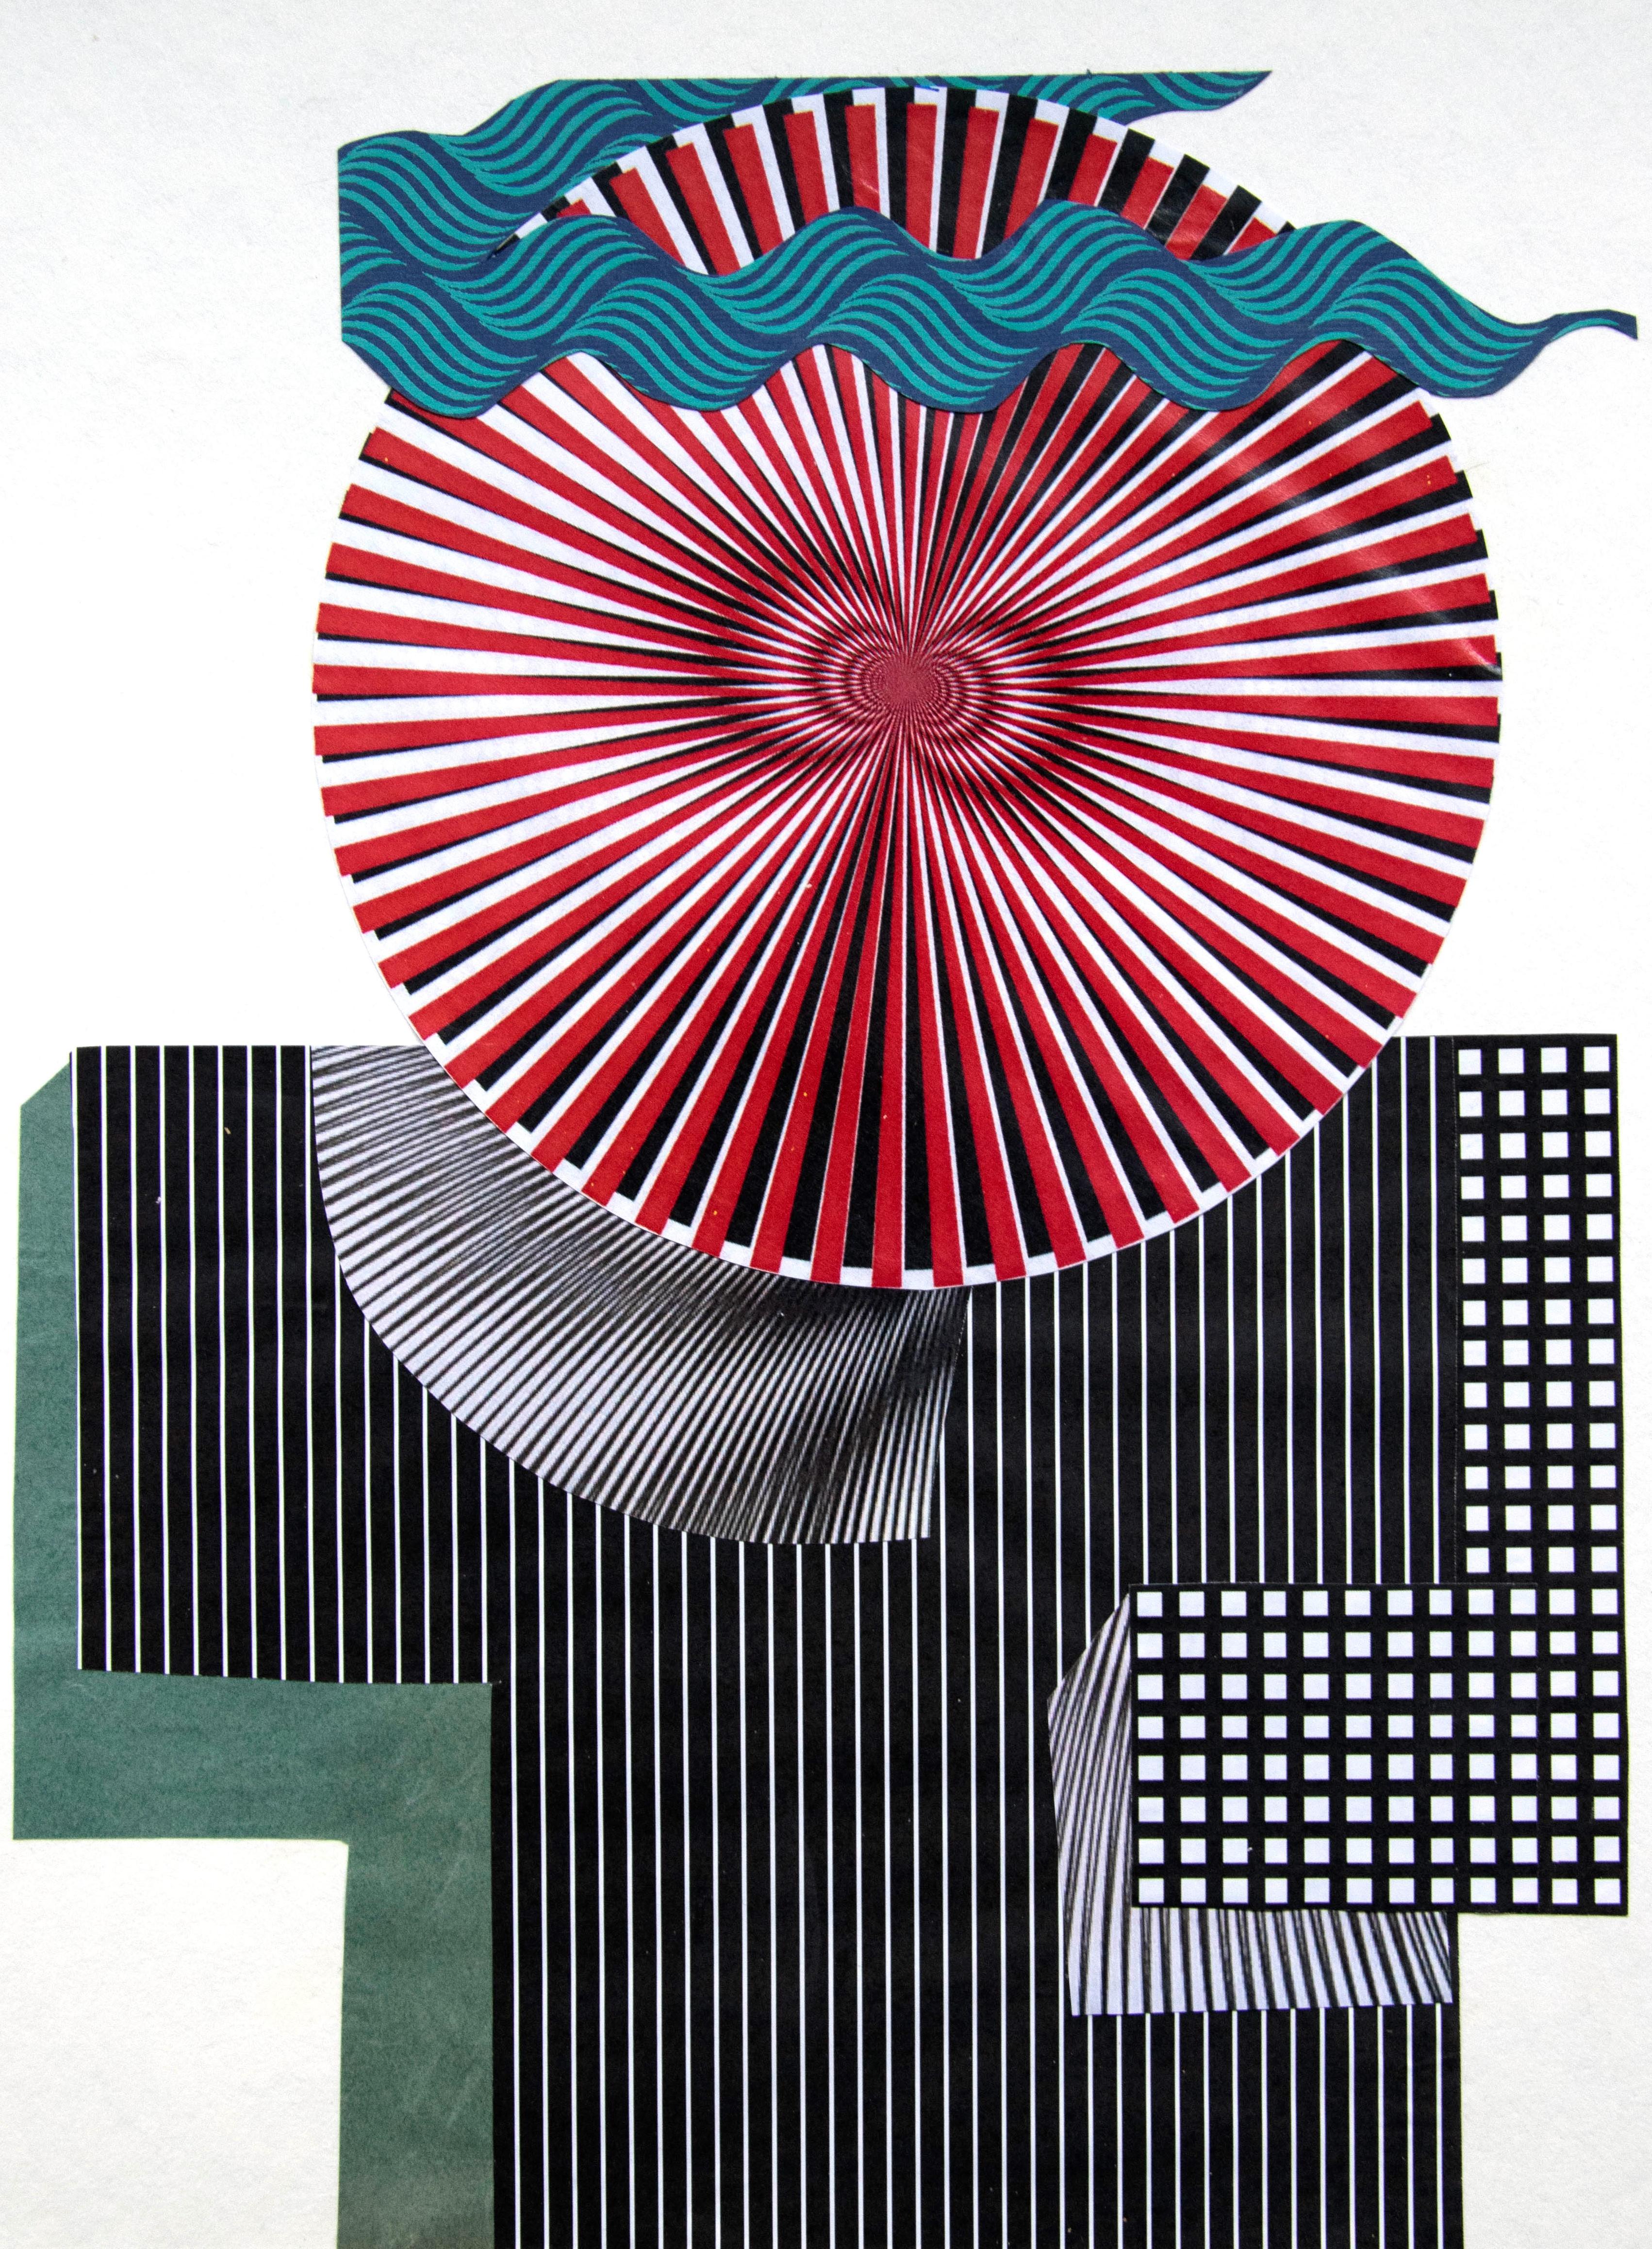 The One Who Sold His Mind - 21st Century, Red, Black, Green, Collage - Art by Raluca Arnăutu